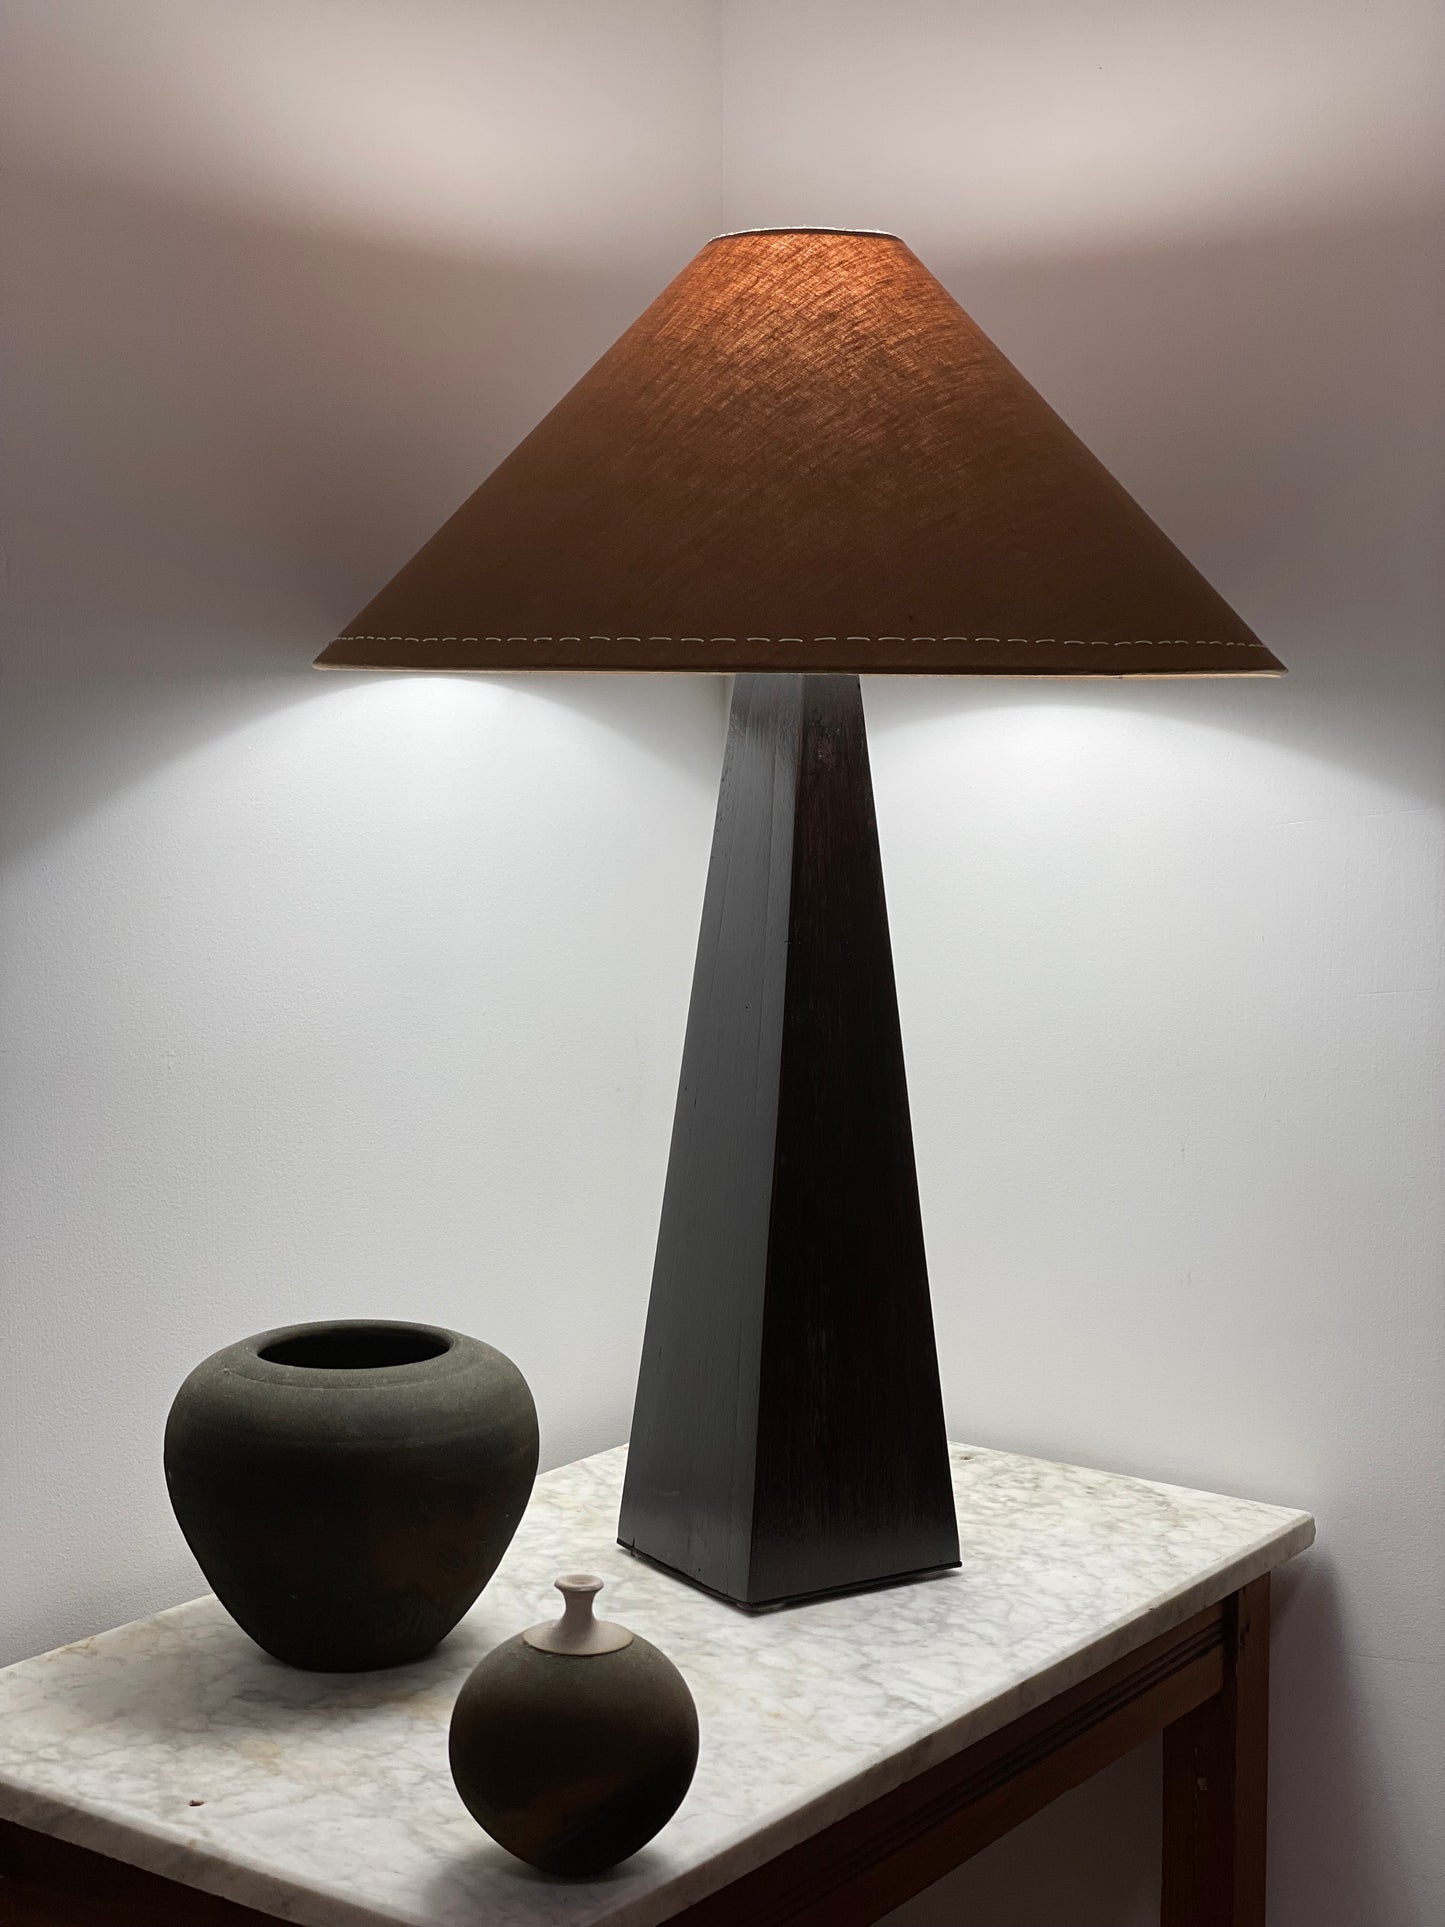 - Timber Table Lamp with Warm Brown Linen Shade